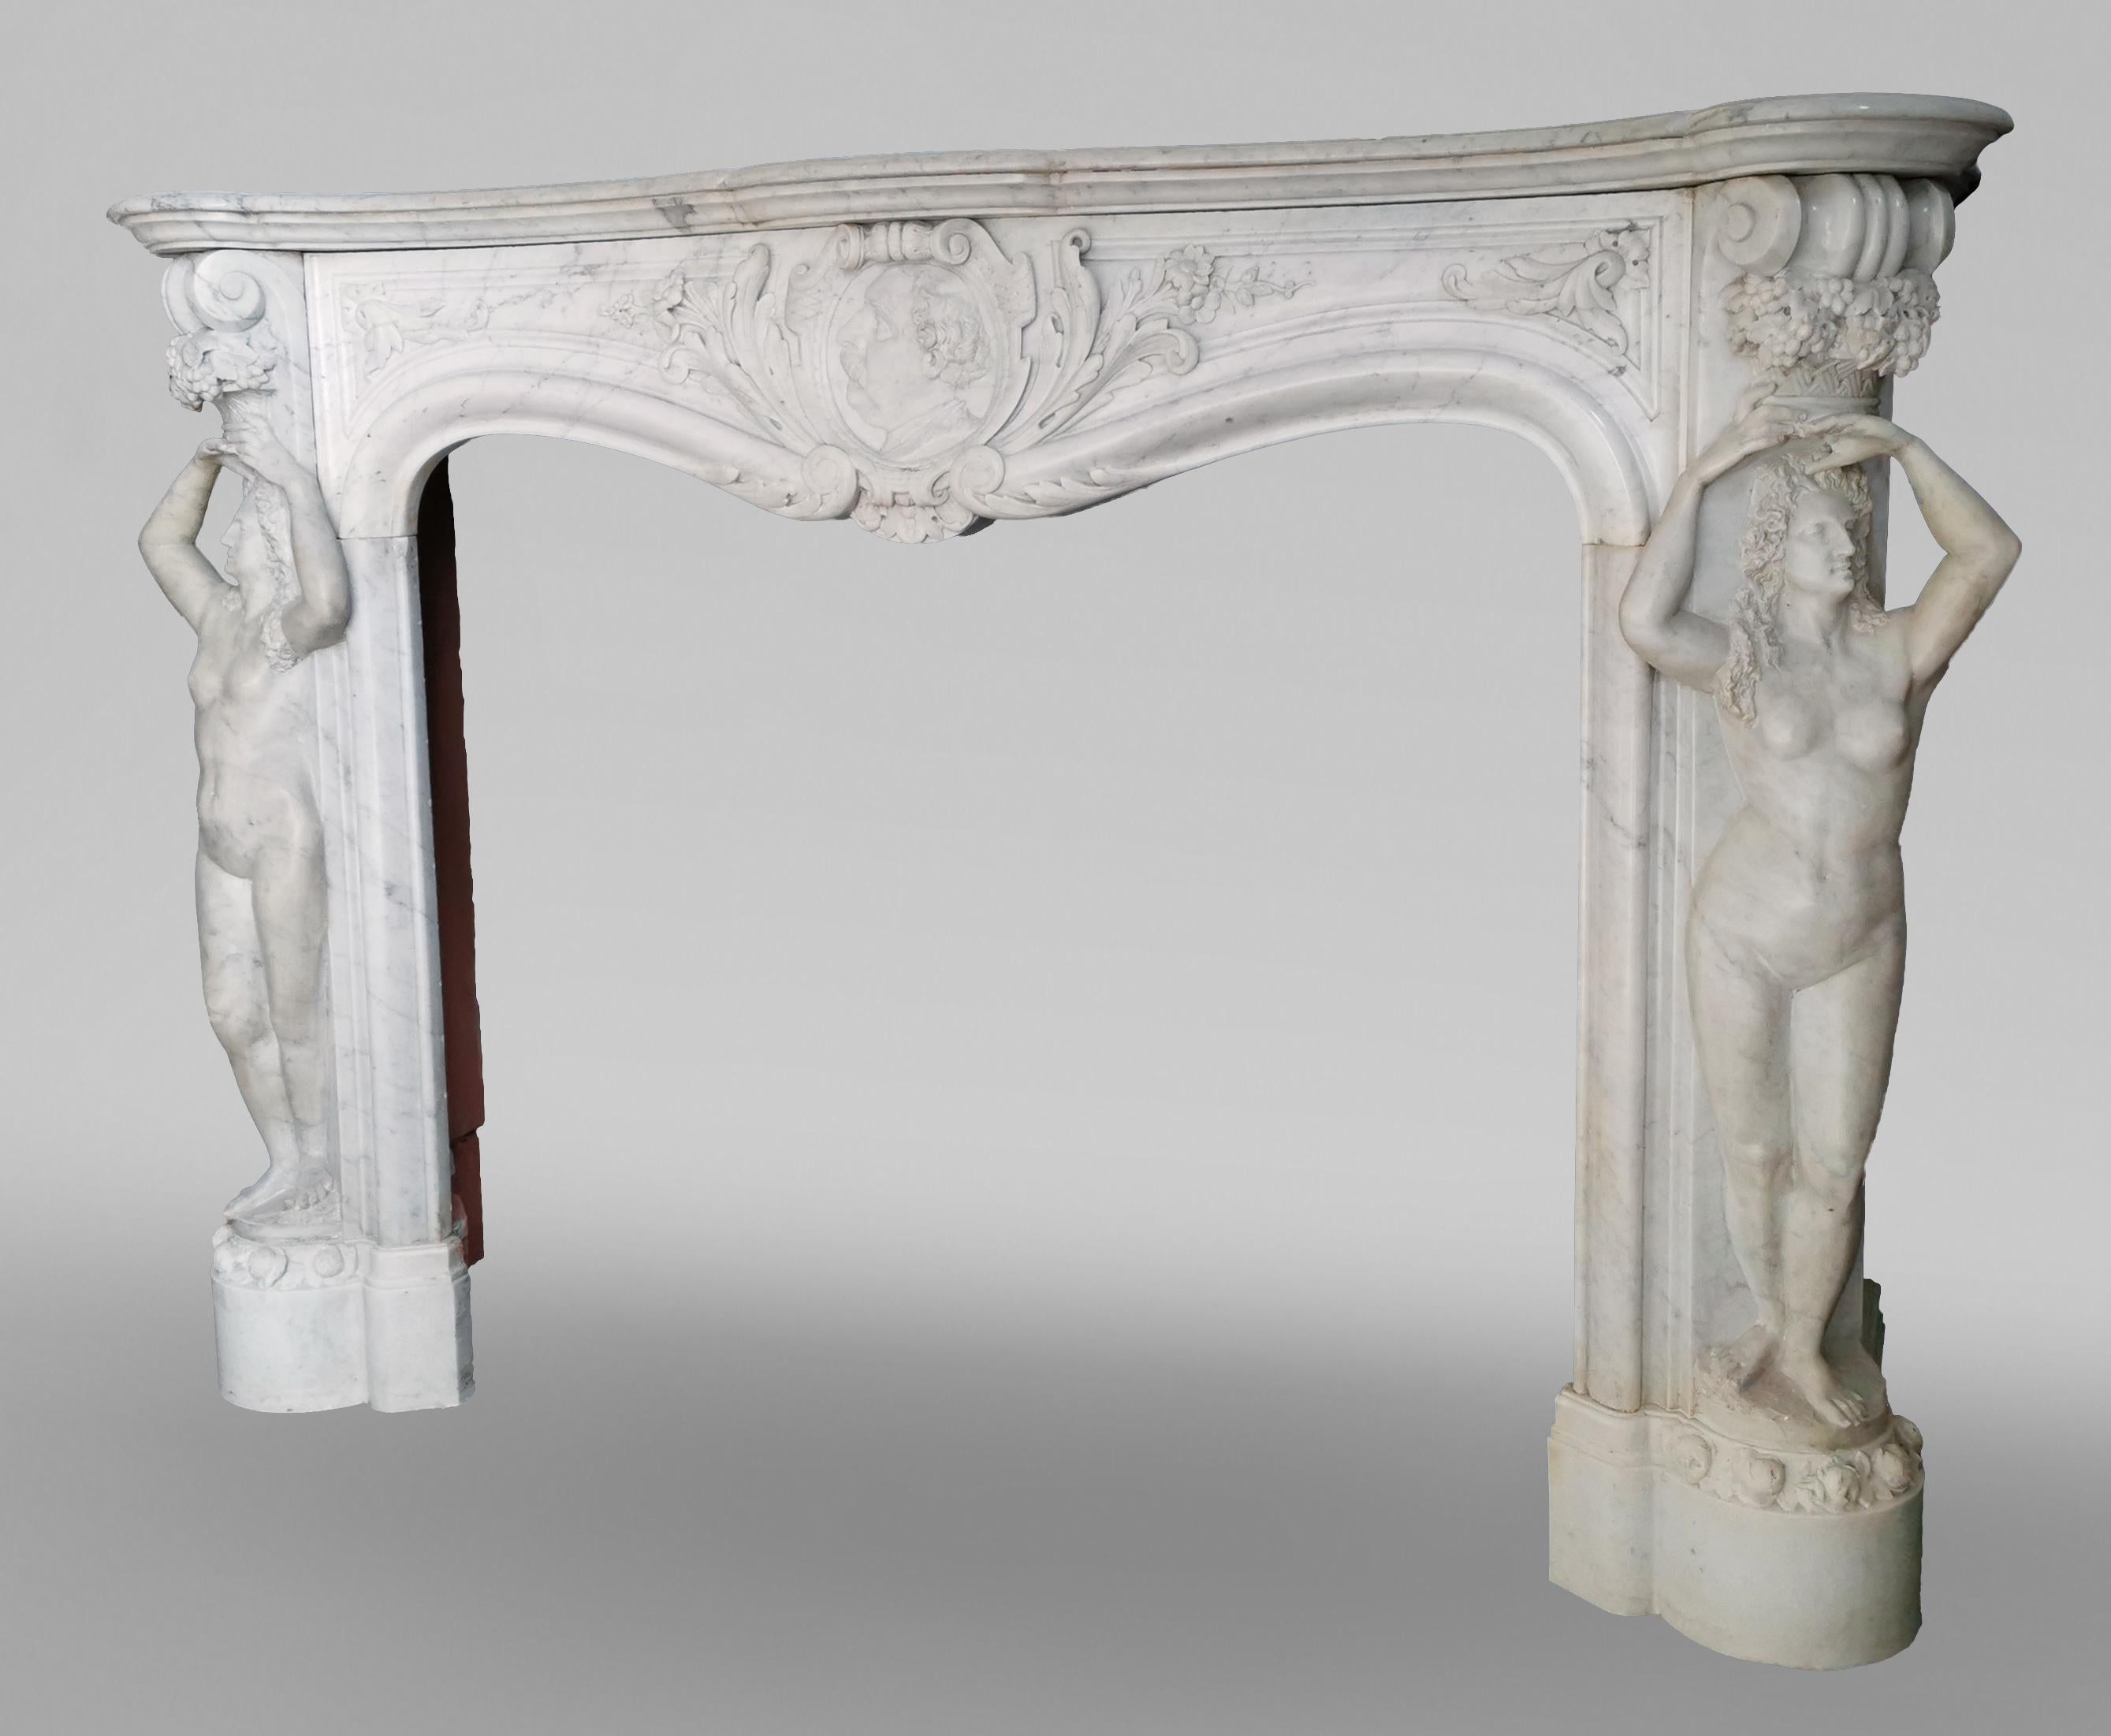 Napoleon III Marble Fireplace with Caryatids, Unique Creation, 1880 For Sale 4